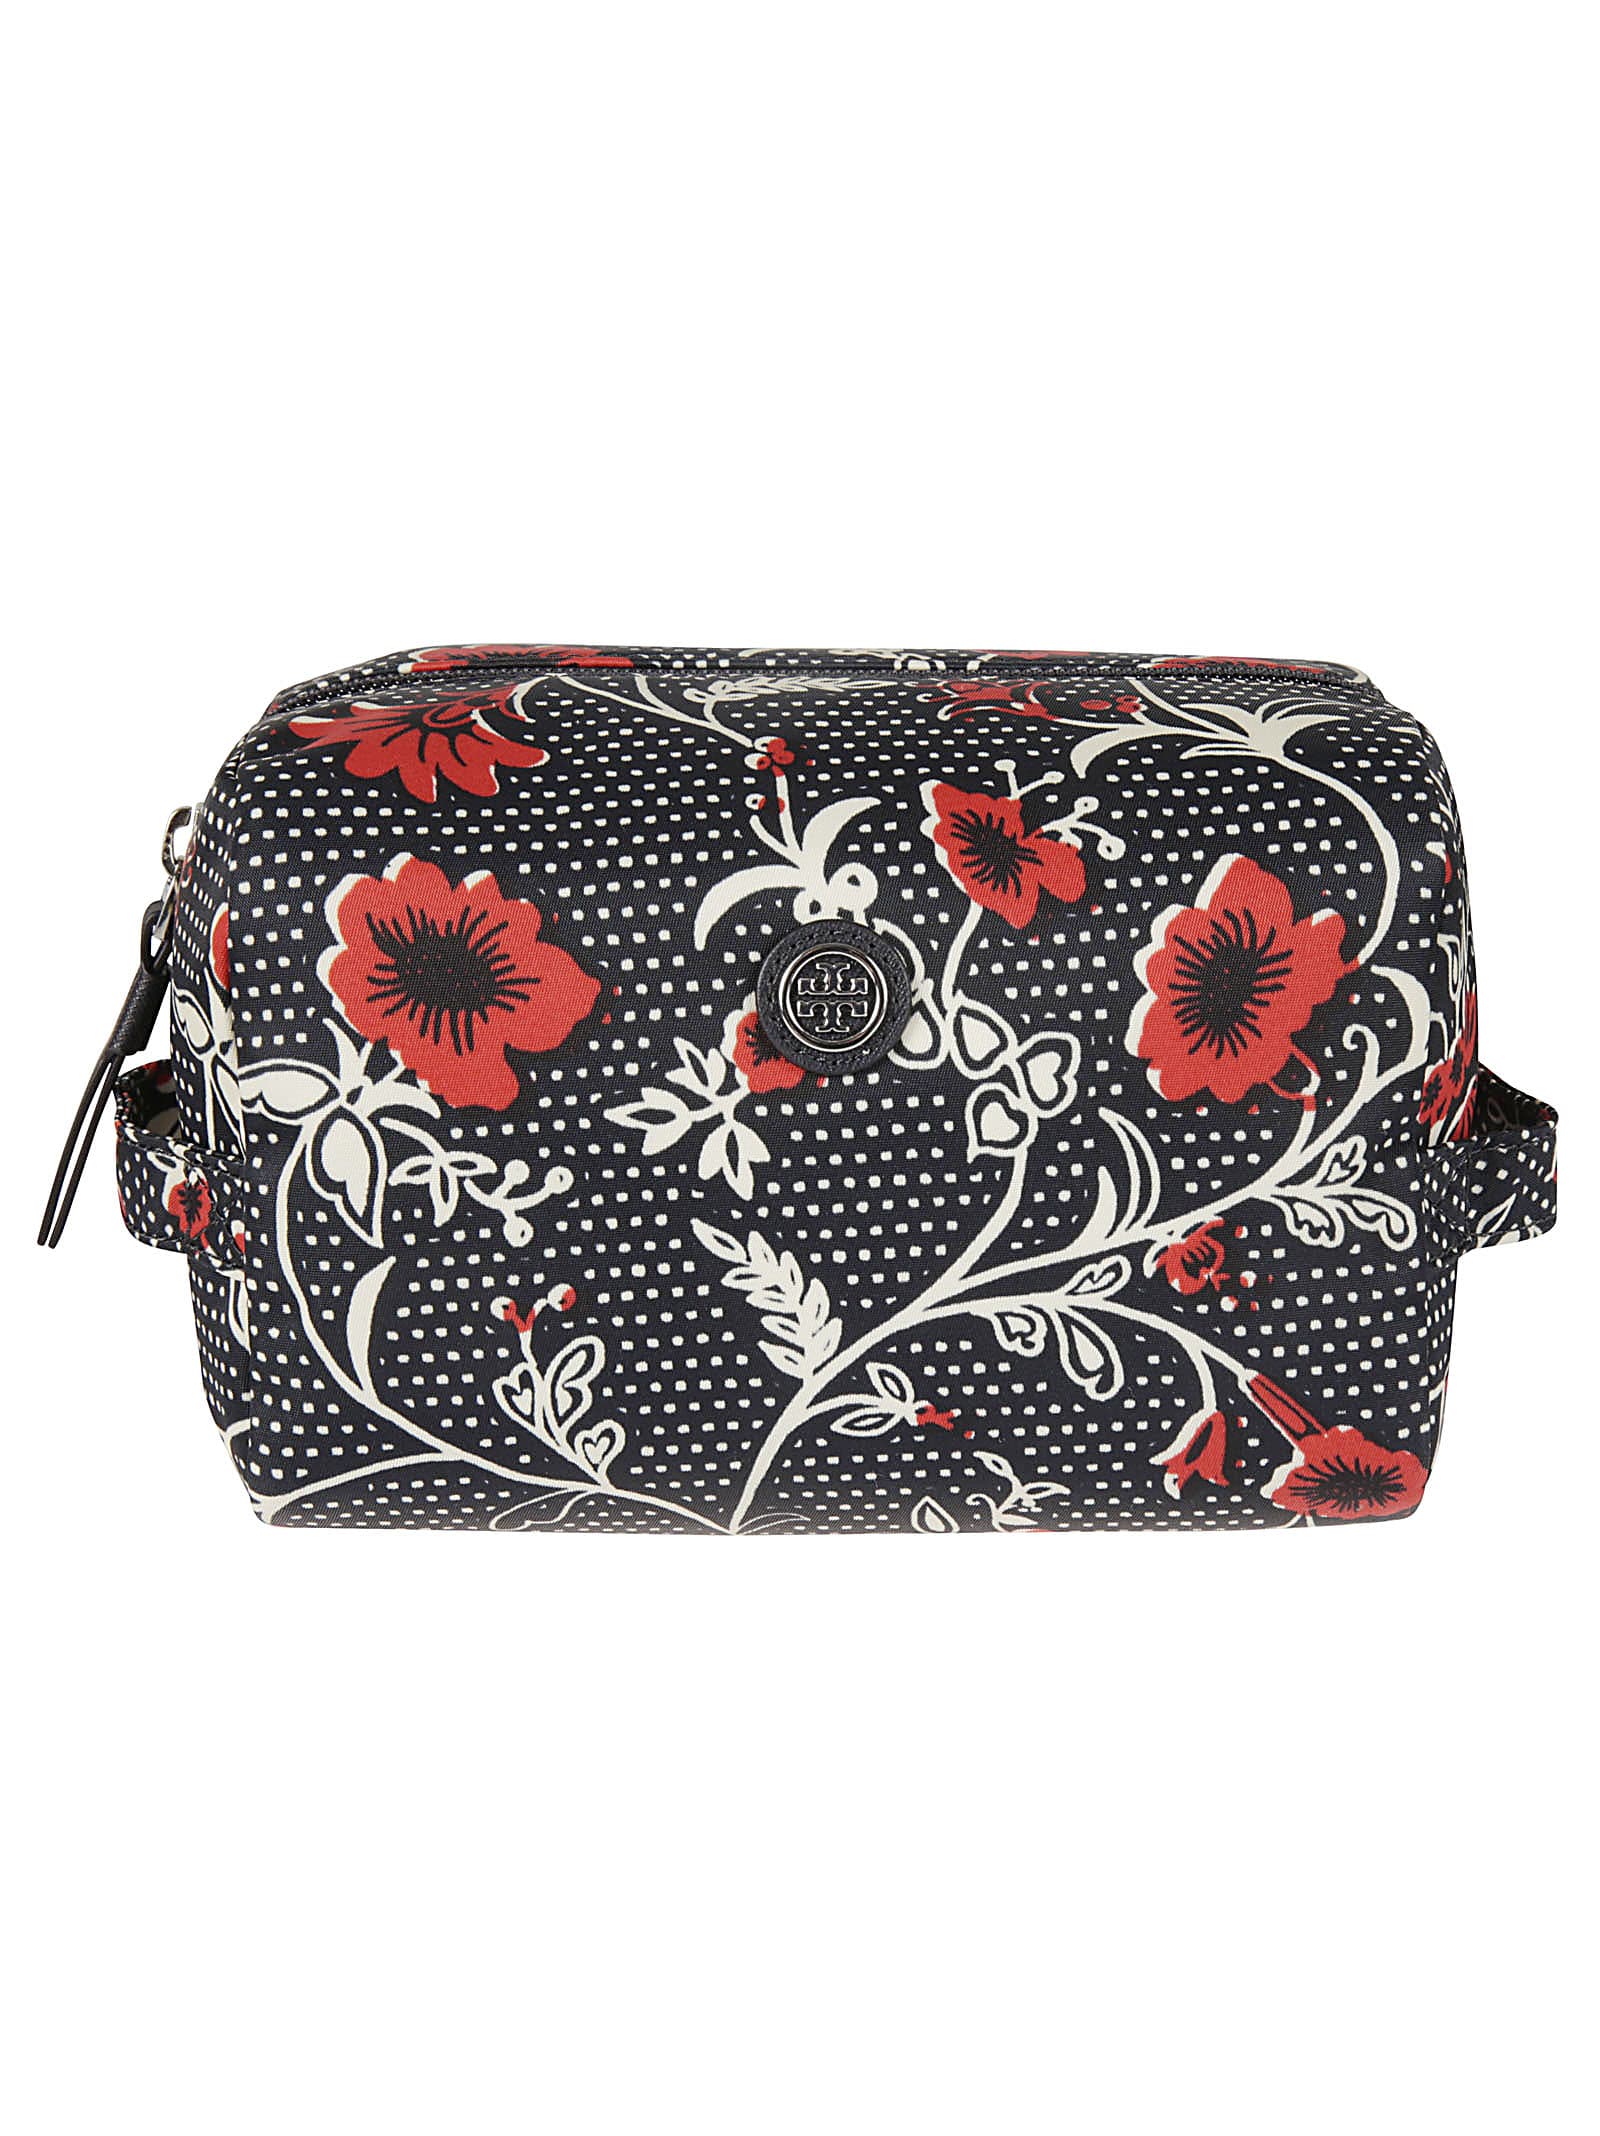 Tory Burch Virginia Printed Large Cosmetic Pouch